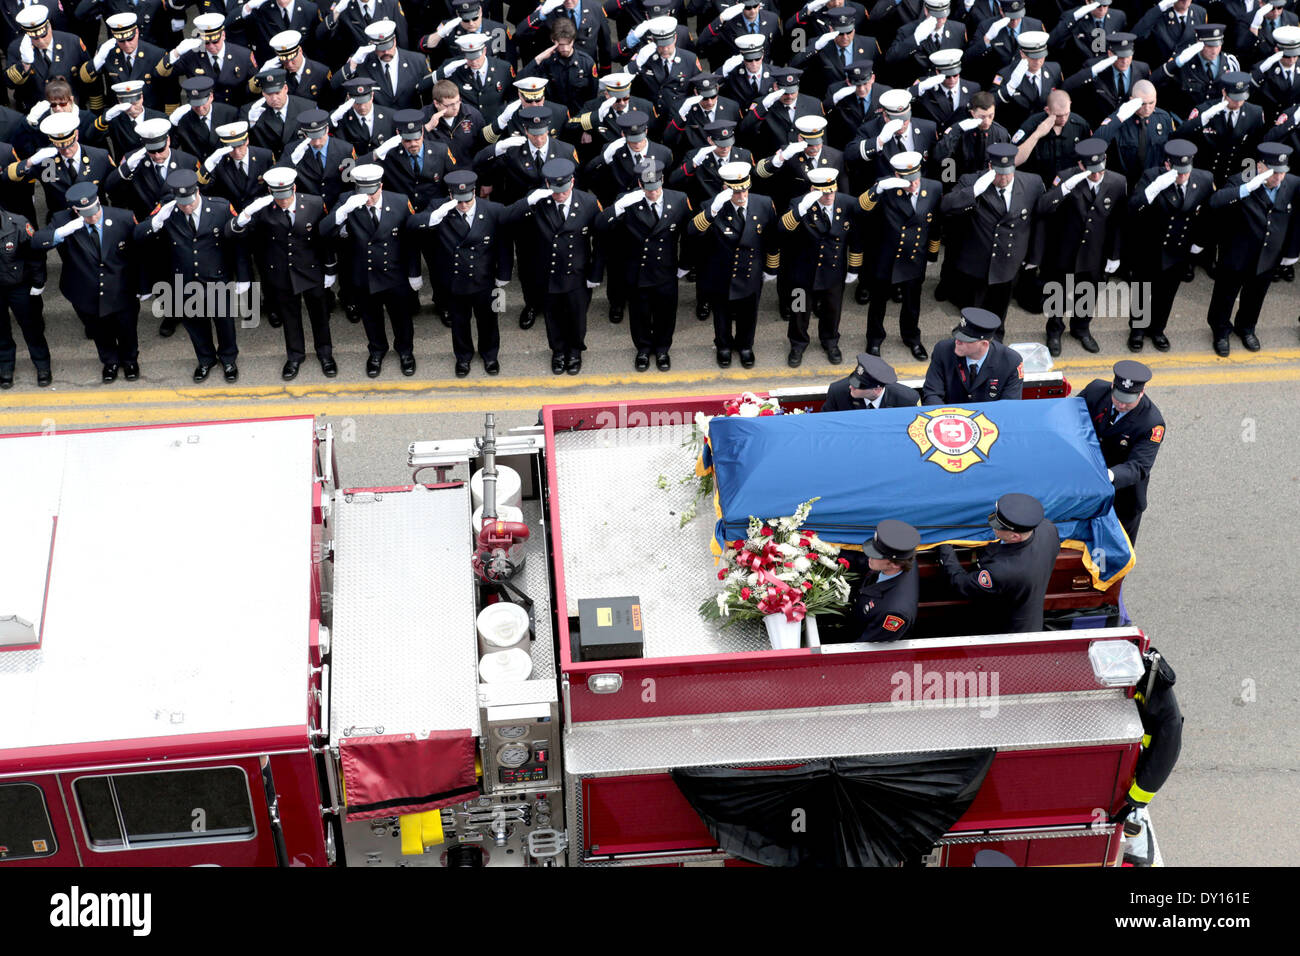 Watertown, Massachusetts, USA. 2nd Apr, 2014. Thousands of firefighters from across the nation gathered outside the Church of Saint Patrick in Watertown, Massachusetts to attend the funeral of fallen Boston Firefighter Lieutenant Edward Walsh. Walsh and fellow firefighter Michael Kennedy died in a nine-alarm blaze at 298 Beacon Street in Boston, Massachusetts. Credit:  Nicolaus Czarnecki/METRO Boston/ZUMAPRESS.com/Alamy Live News Stock Photo